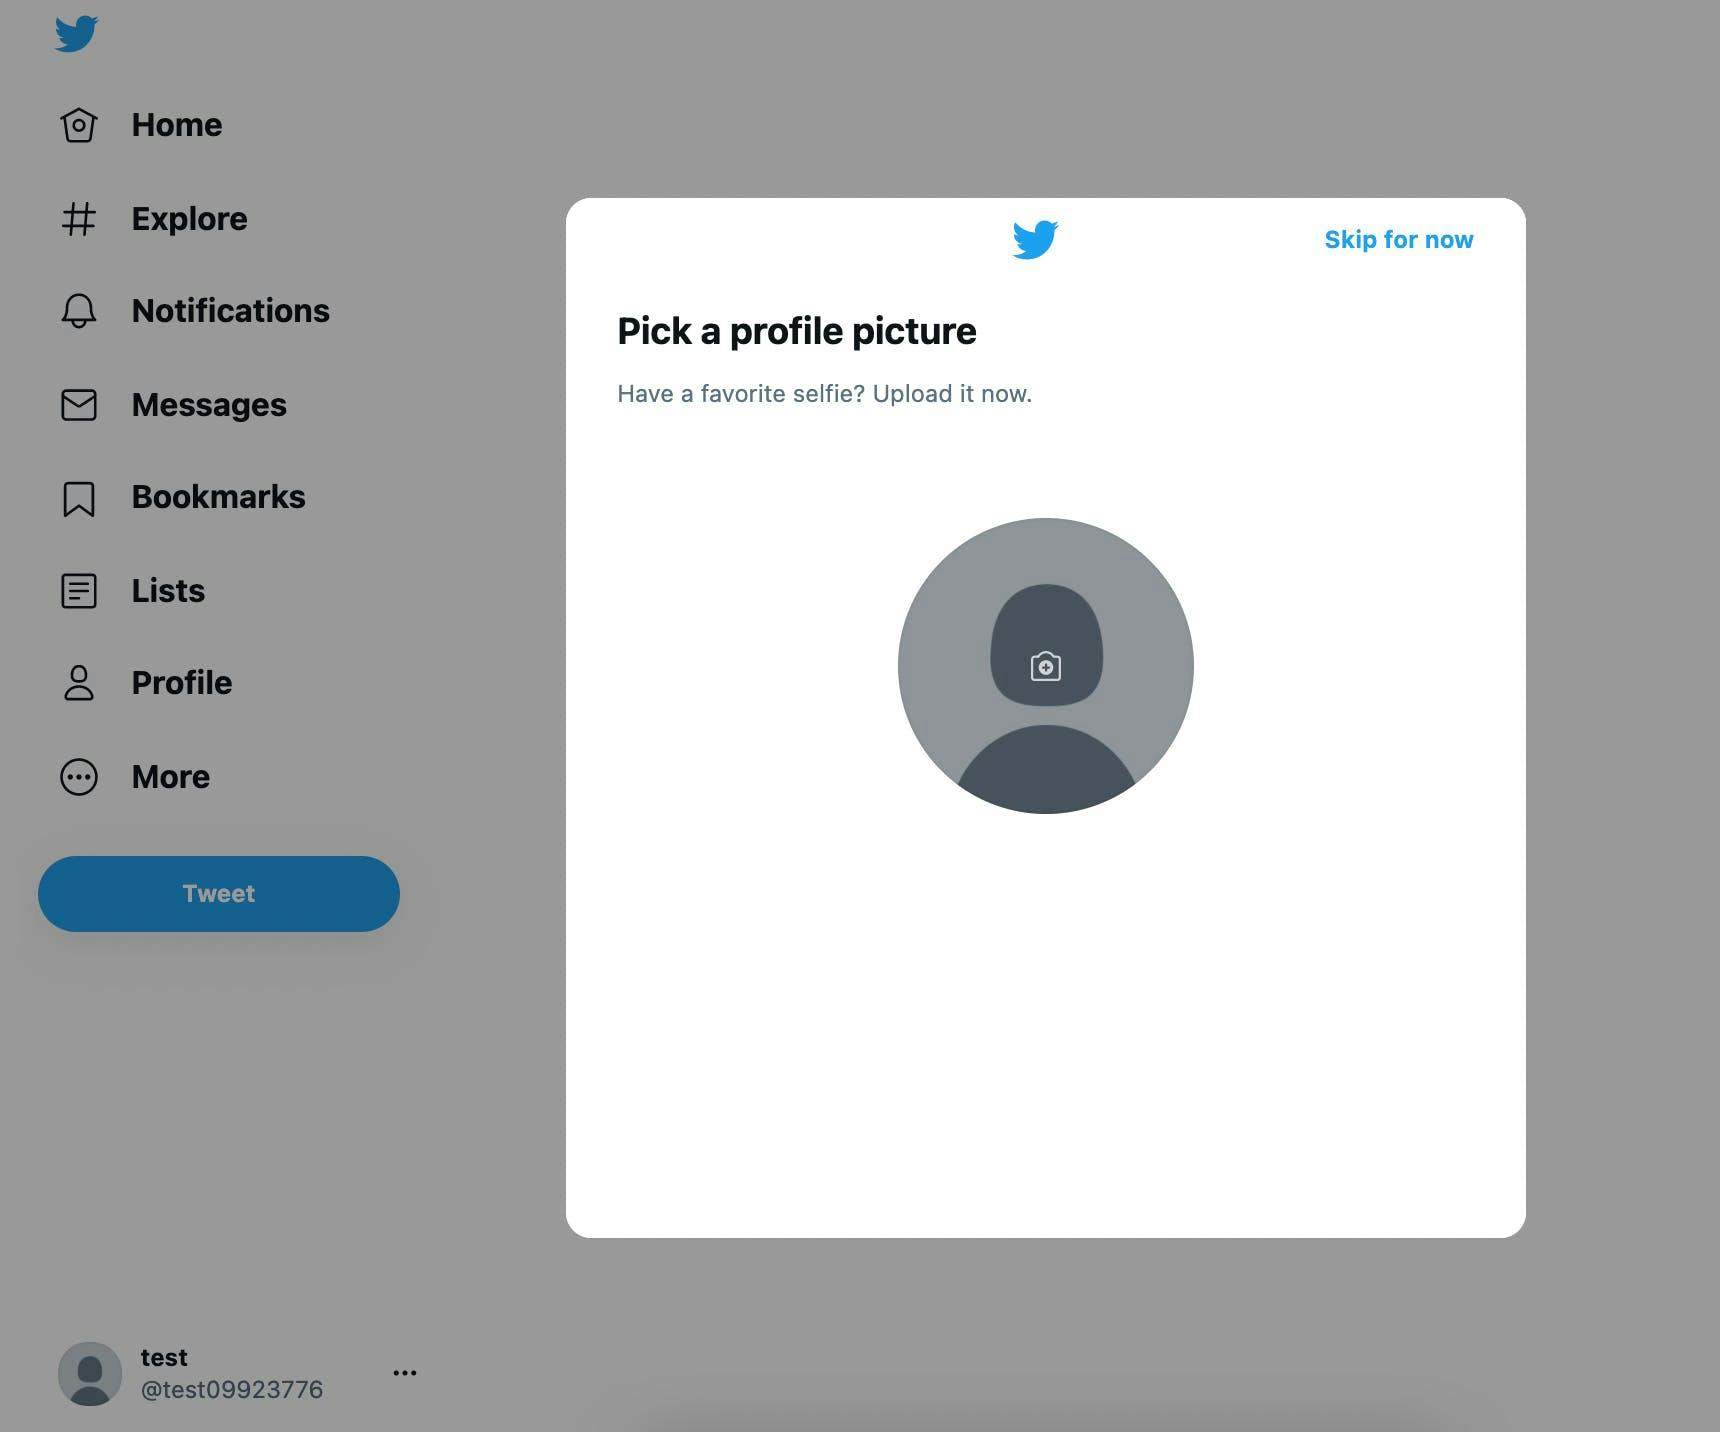 Step 6 in creating a Twitter account - uploading a profile image 400x400 pixels